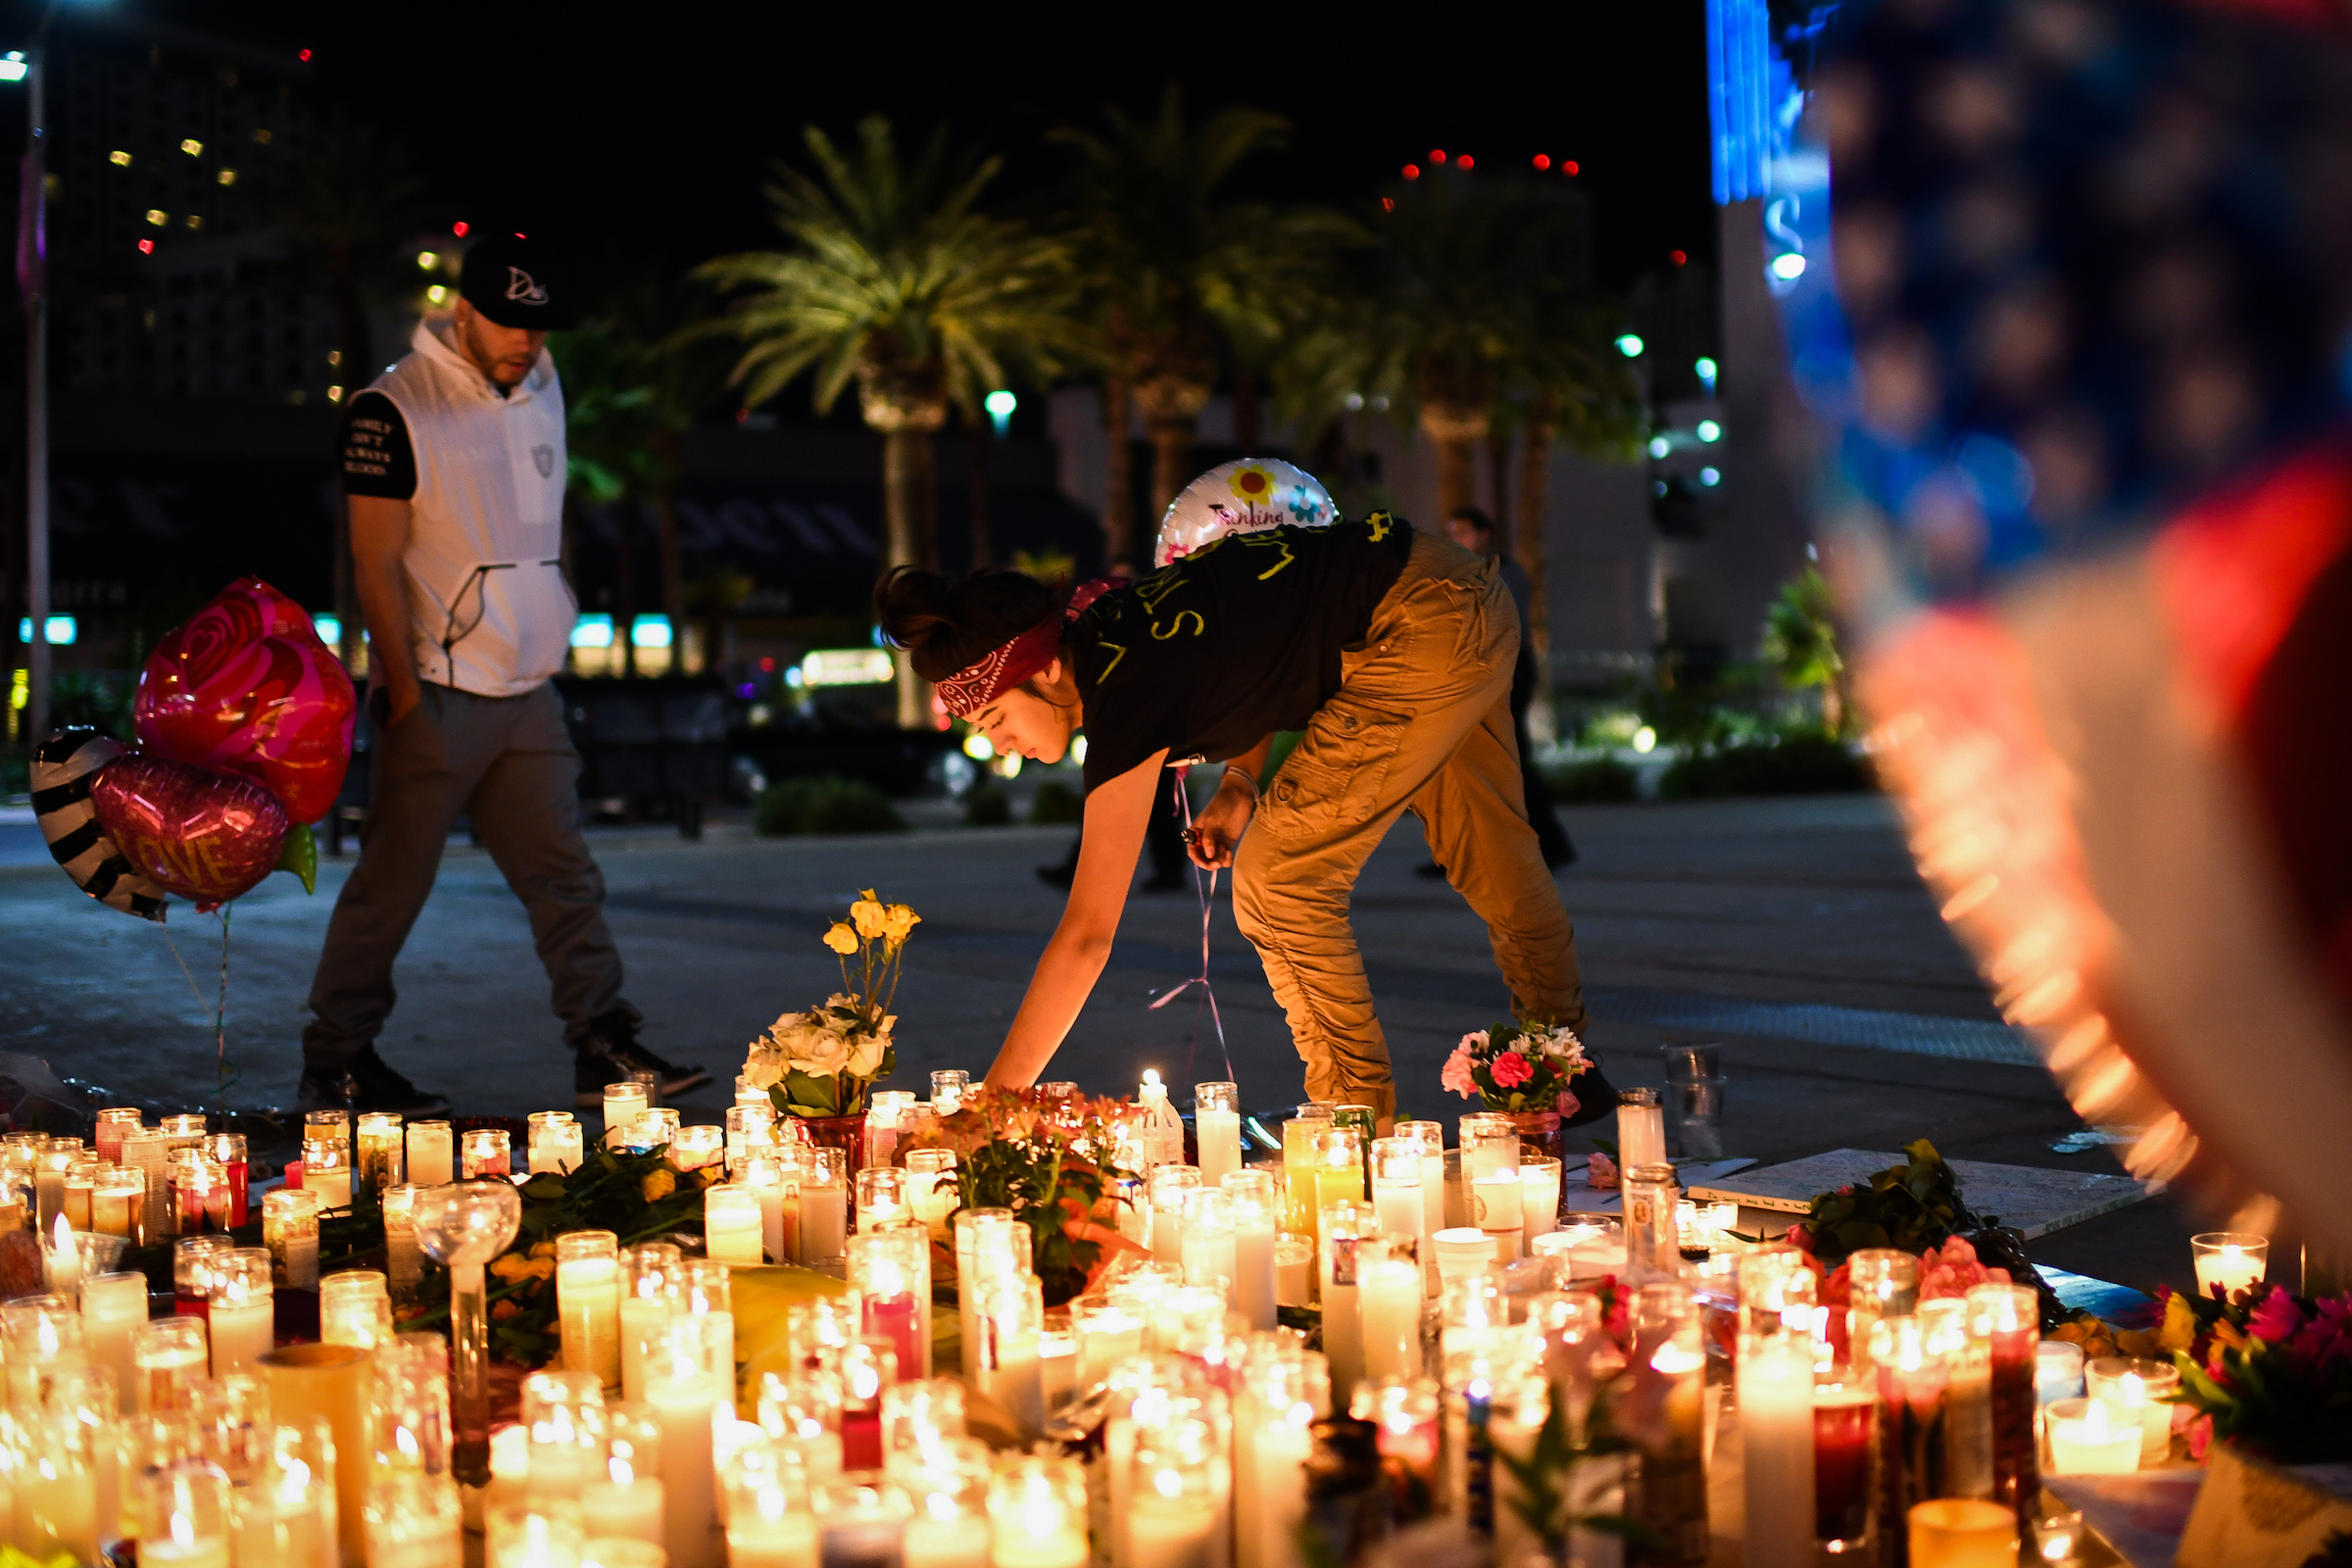 Priscilla Olivas, 19, of Las Vegas, NV, lights up a candle at a street vigil that was held for the victims along the Las Vegas Strip a day after 59 people were killed and more than 500 wounded at the Route 91 Harvest Country Music Festival on Monday, October 2, 2017, in Las Vegas, NV. (Salwan Georges&mdash;The Washington Post/Getty Images)